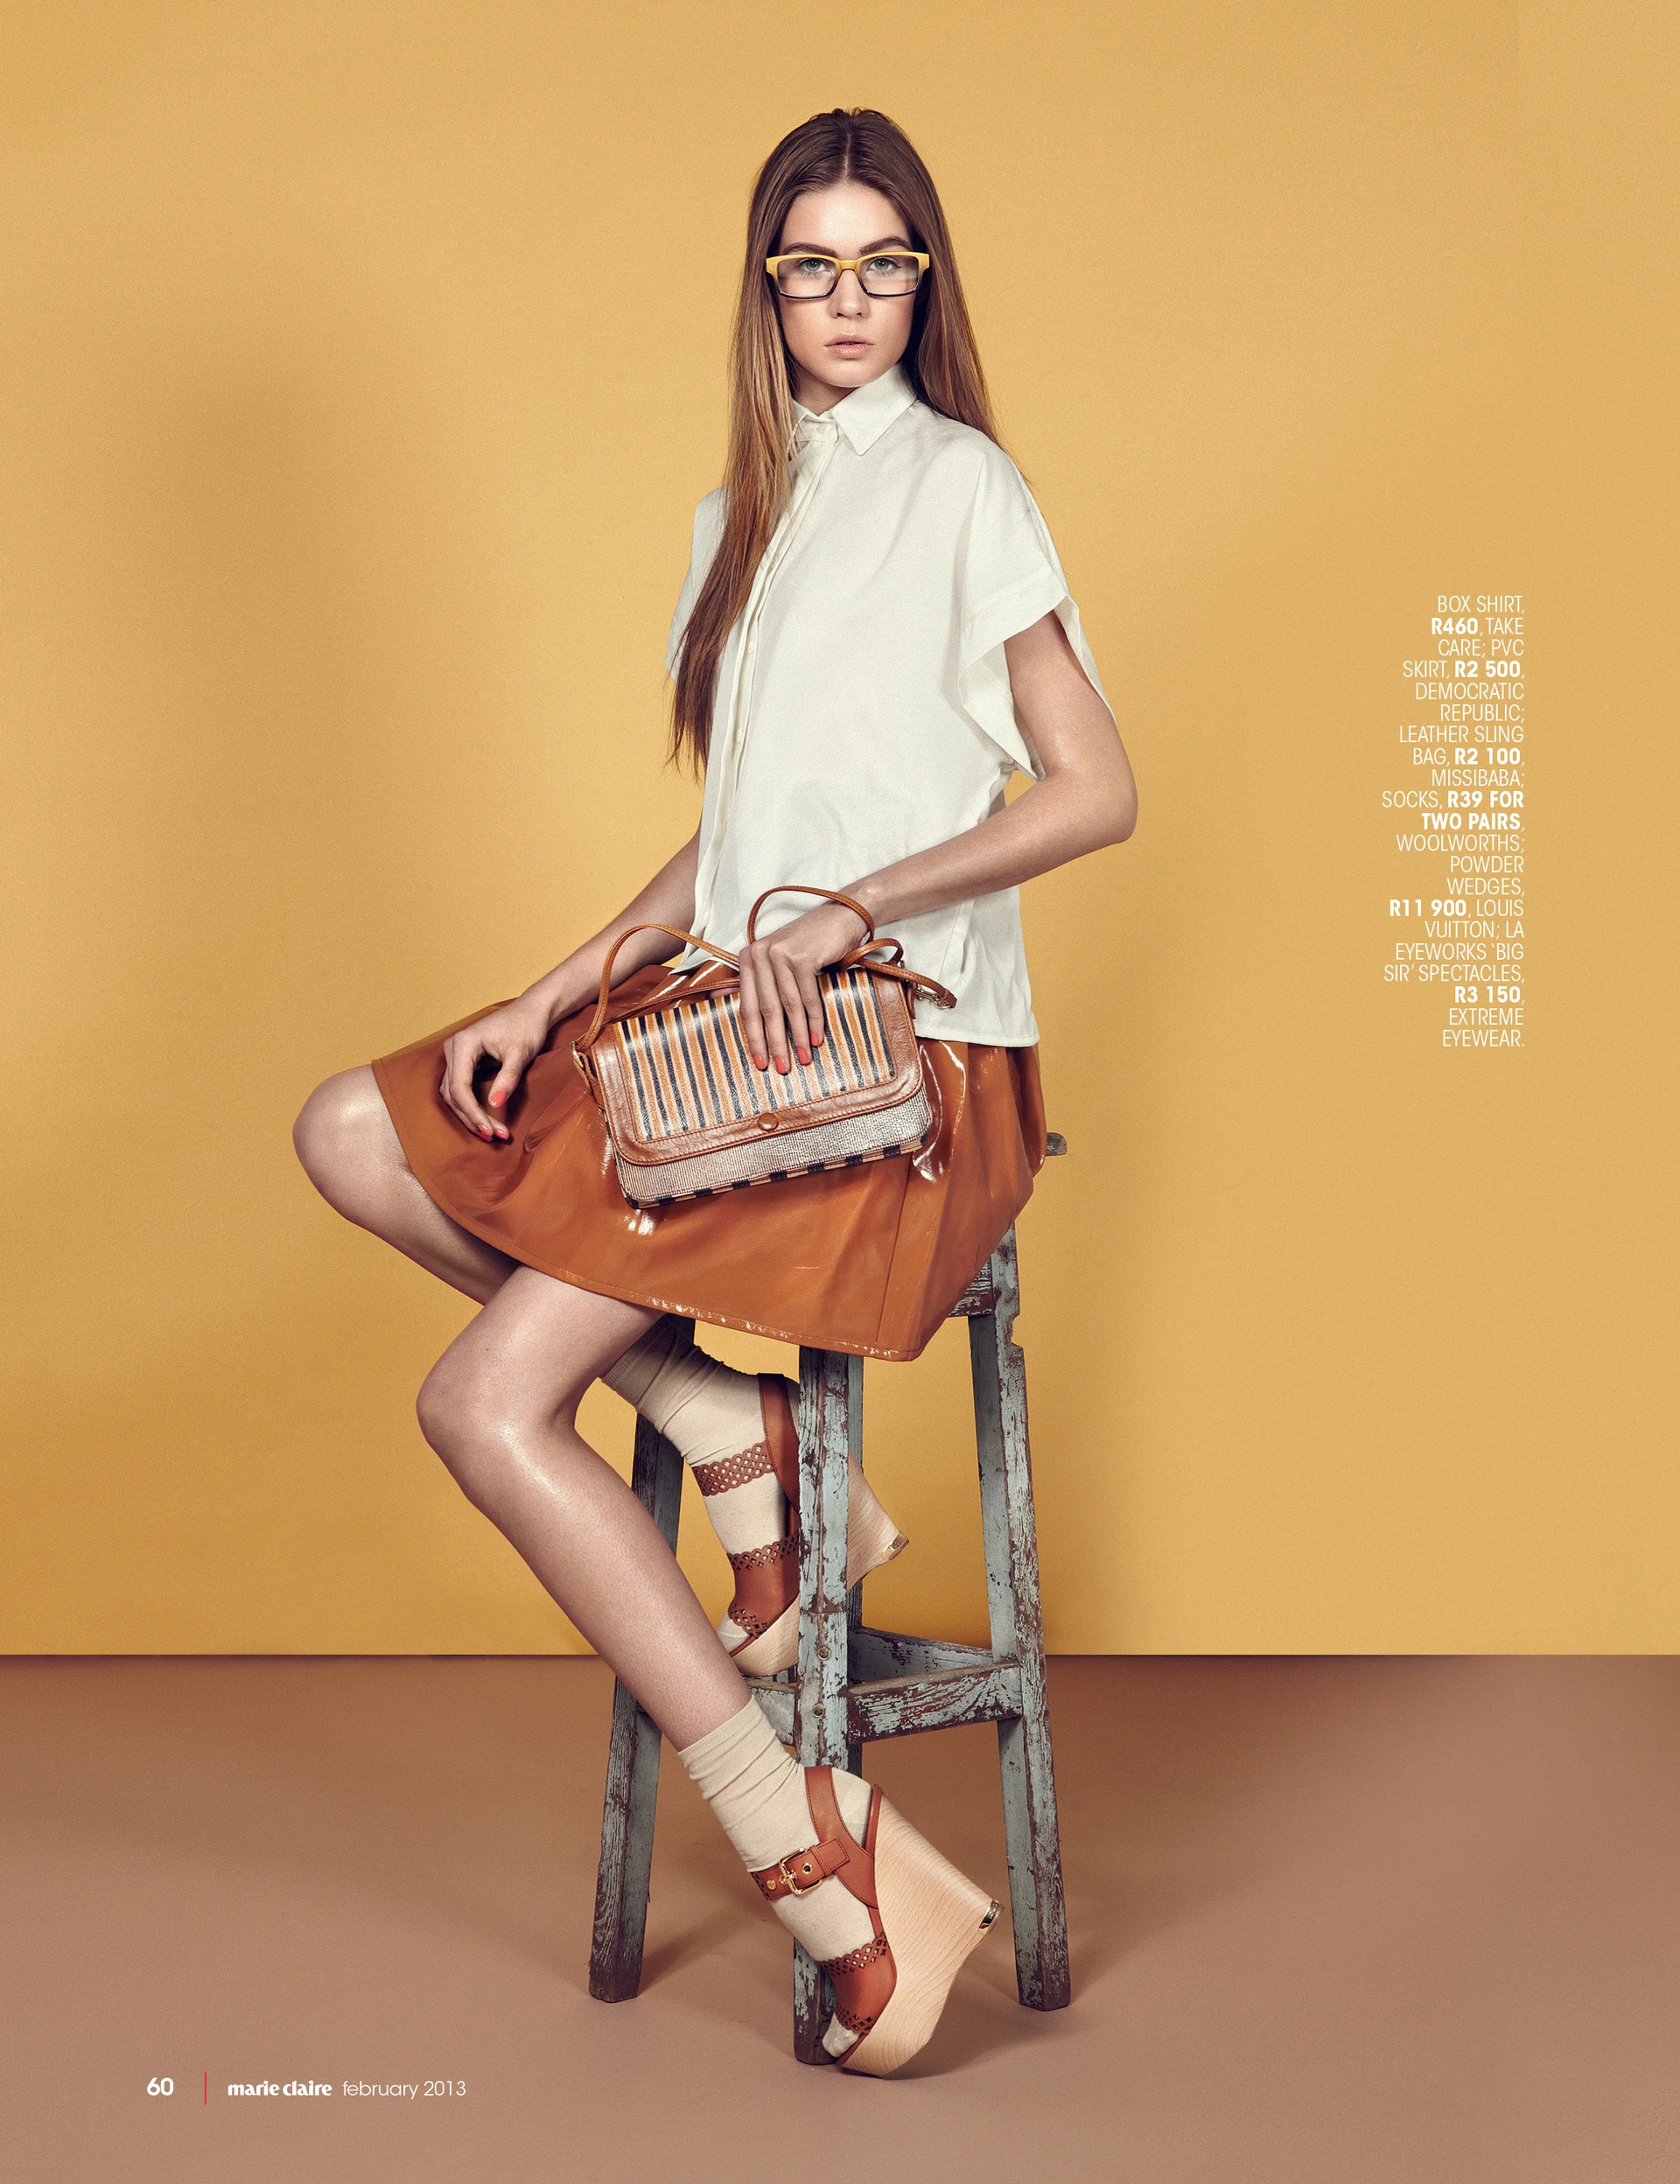 A young woman with long straight brown hair and yellow-framed glasses stands against a mustard-yellow background. She's wearing a white short-sleeved box shirt and a shiny caramel-colored PVC skirt. She carries a striped handbag with leather handles and brown details. She's perched on the edge of a weathered wooden stool, showing off mismatched socks in shades of beige, white, and rust, paired with thick wooden platform shoes with leather straps. Text on the image lists details about her outfit and accessories, and there's a marie claire February 2013 label at the bottom left.